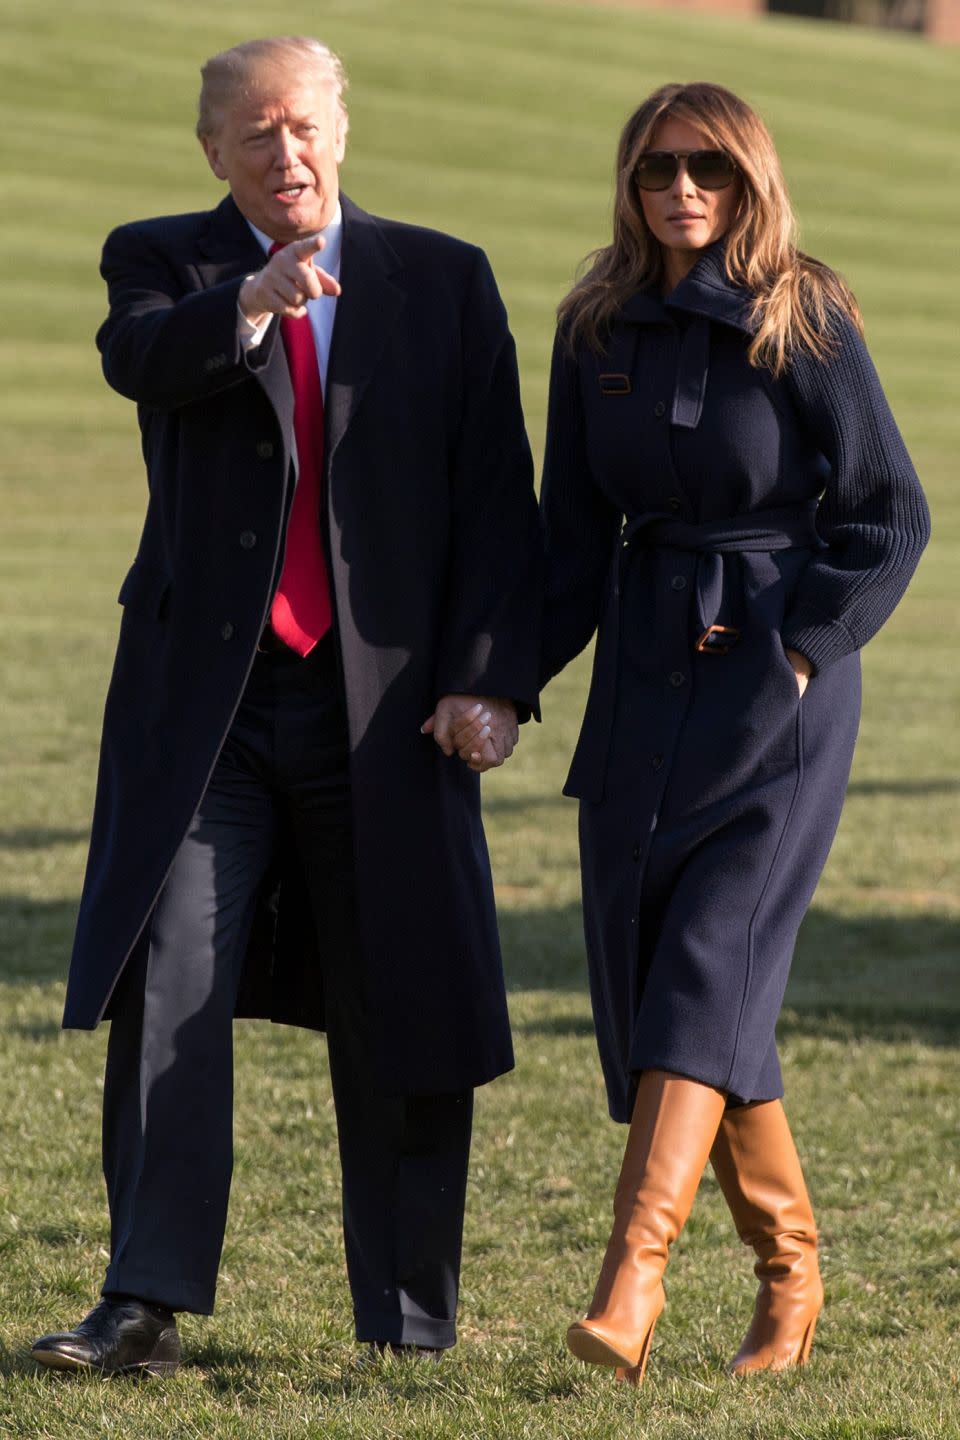 After 12 years of marriage, insiders say Melania doesn't have any plans to split with Trump. Photo: Getty